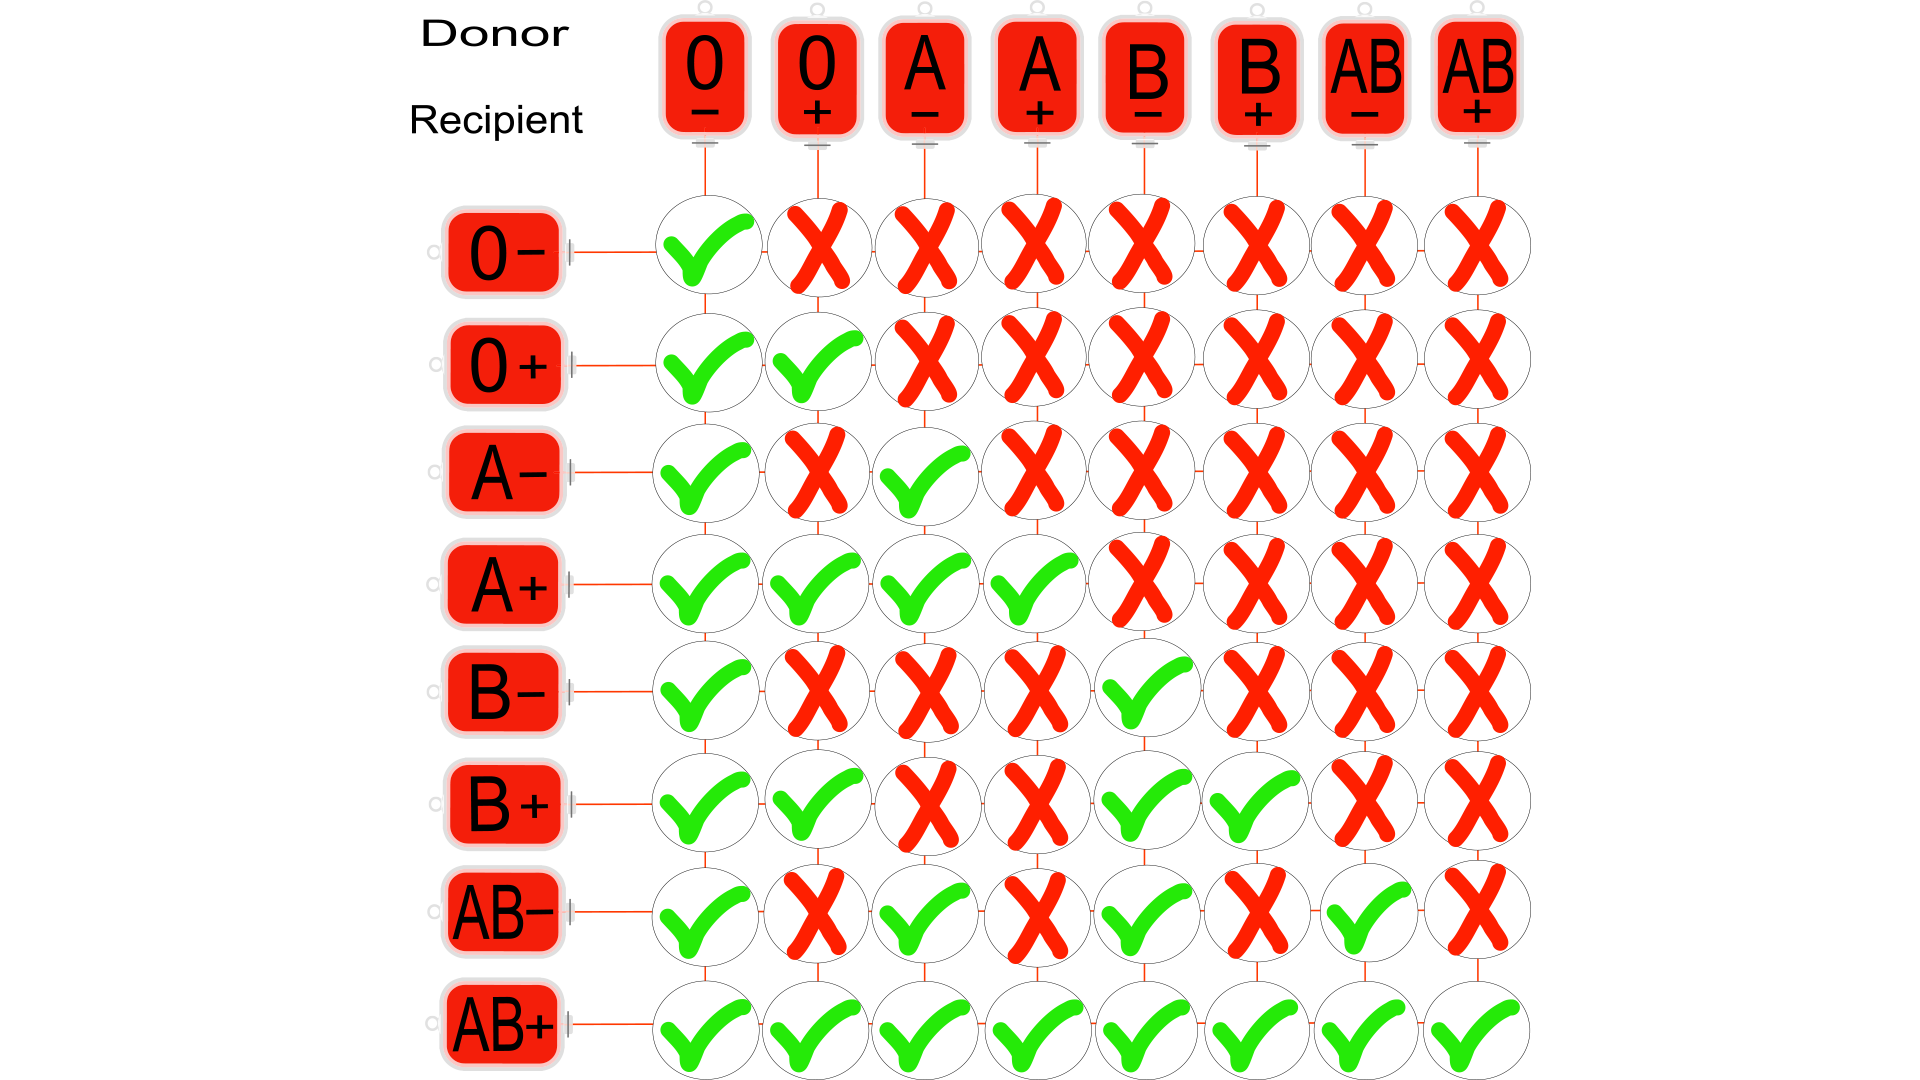 diagram of blood types with relationship between donors and recipients 